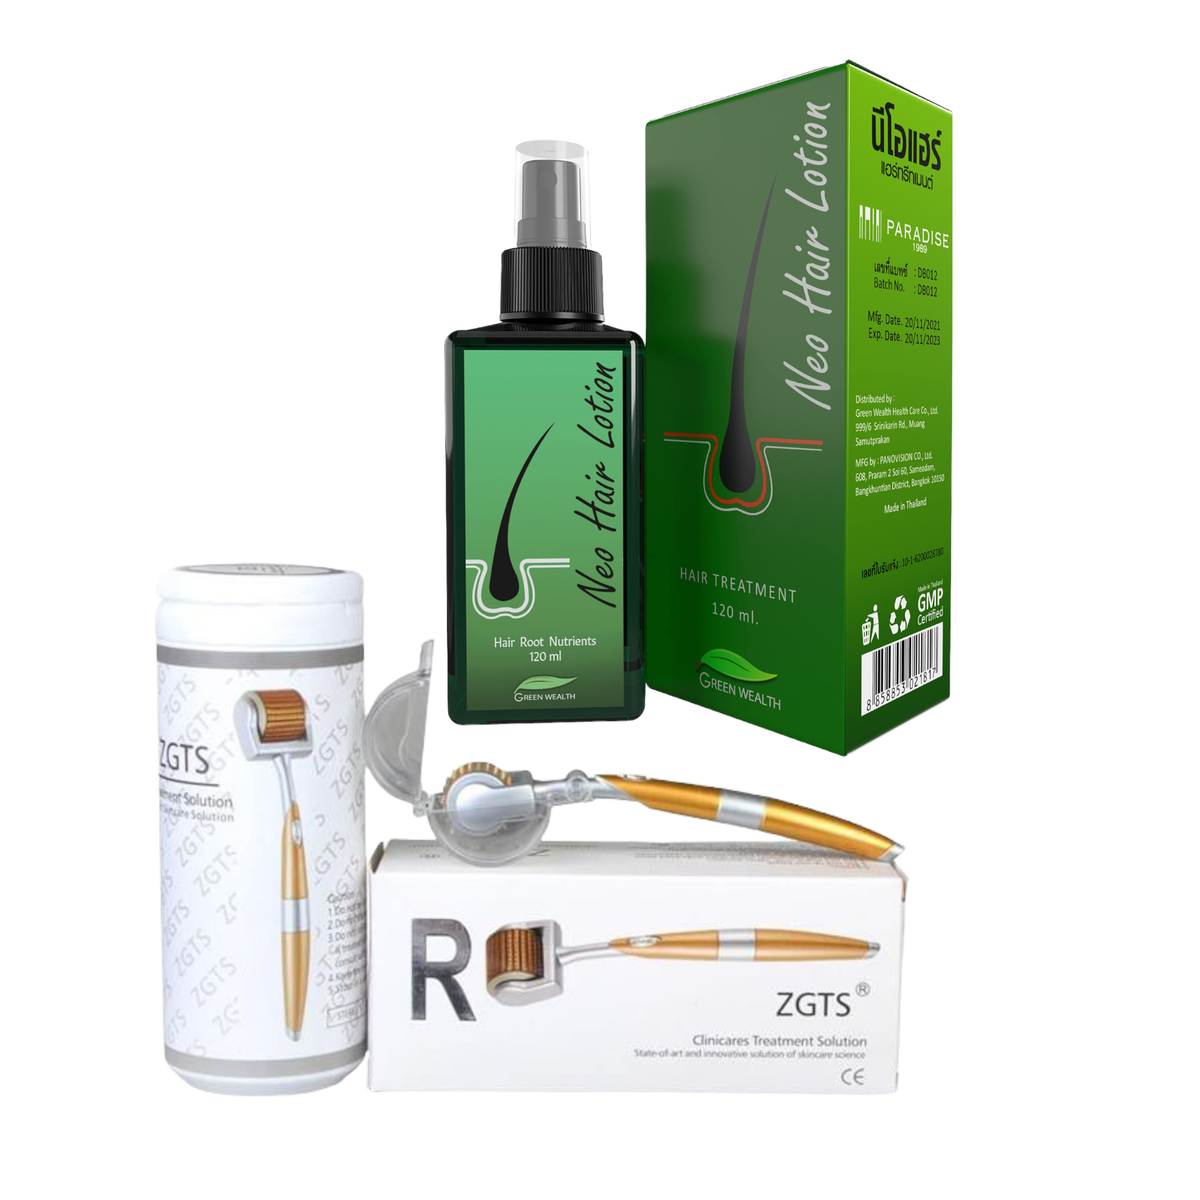 Neo Hair Lotion 120ml with ZGTS Clinicare Derma Roller Set by Parisetc |  Buy Online in South Africa 